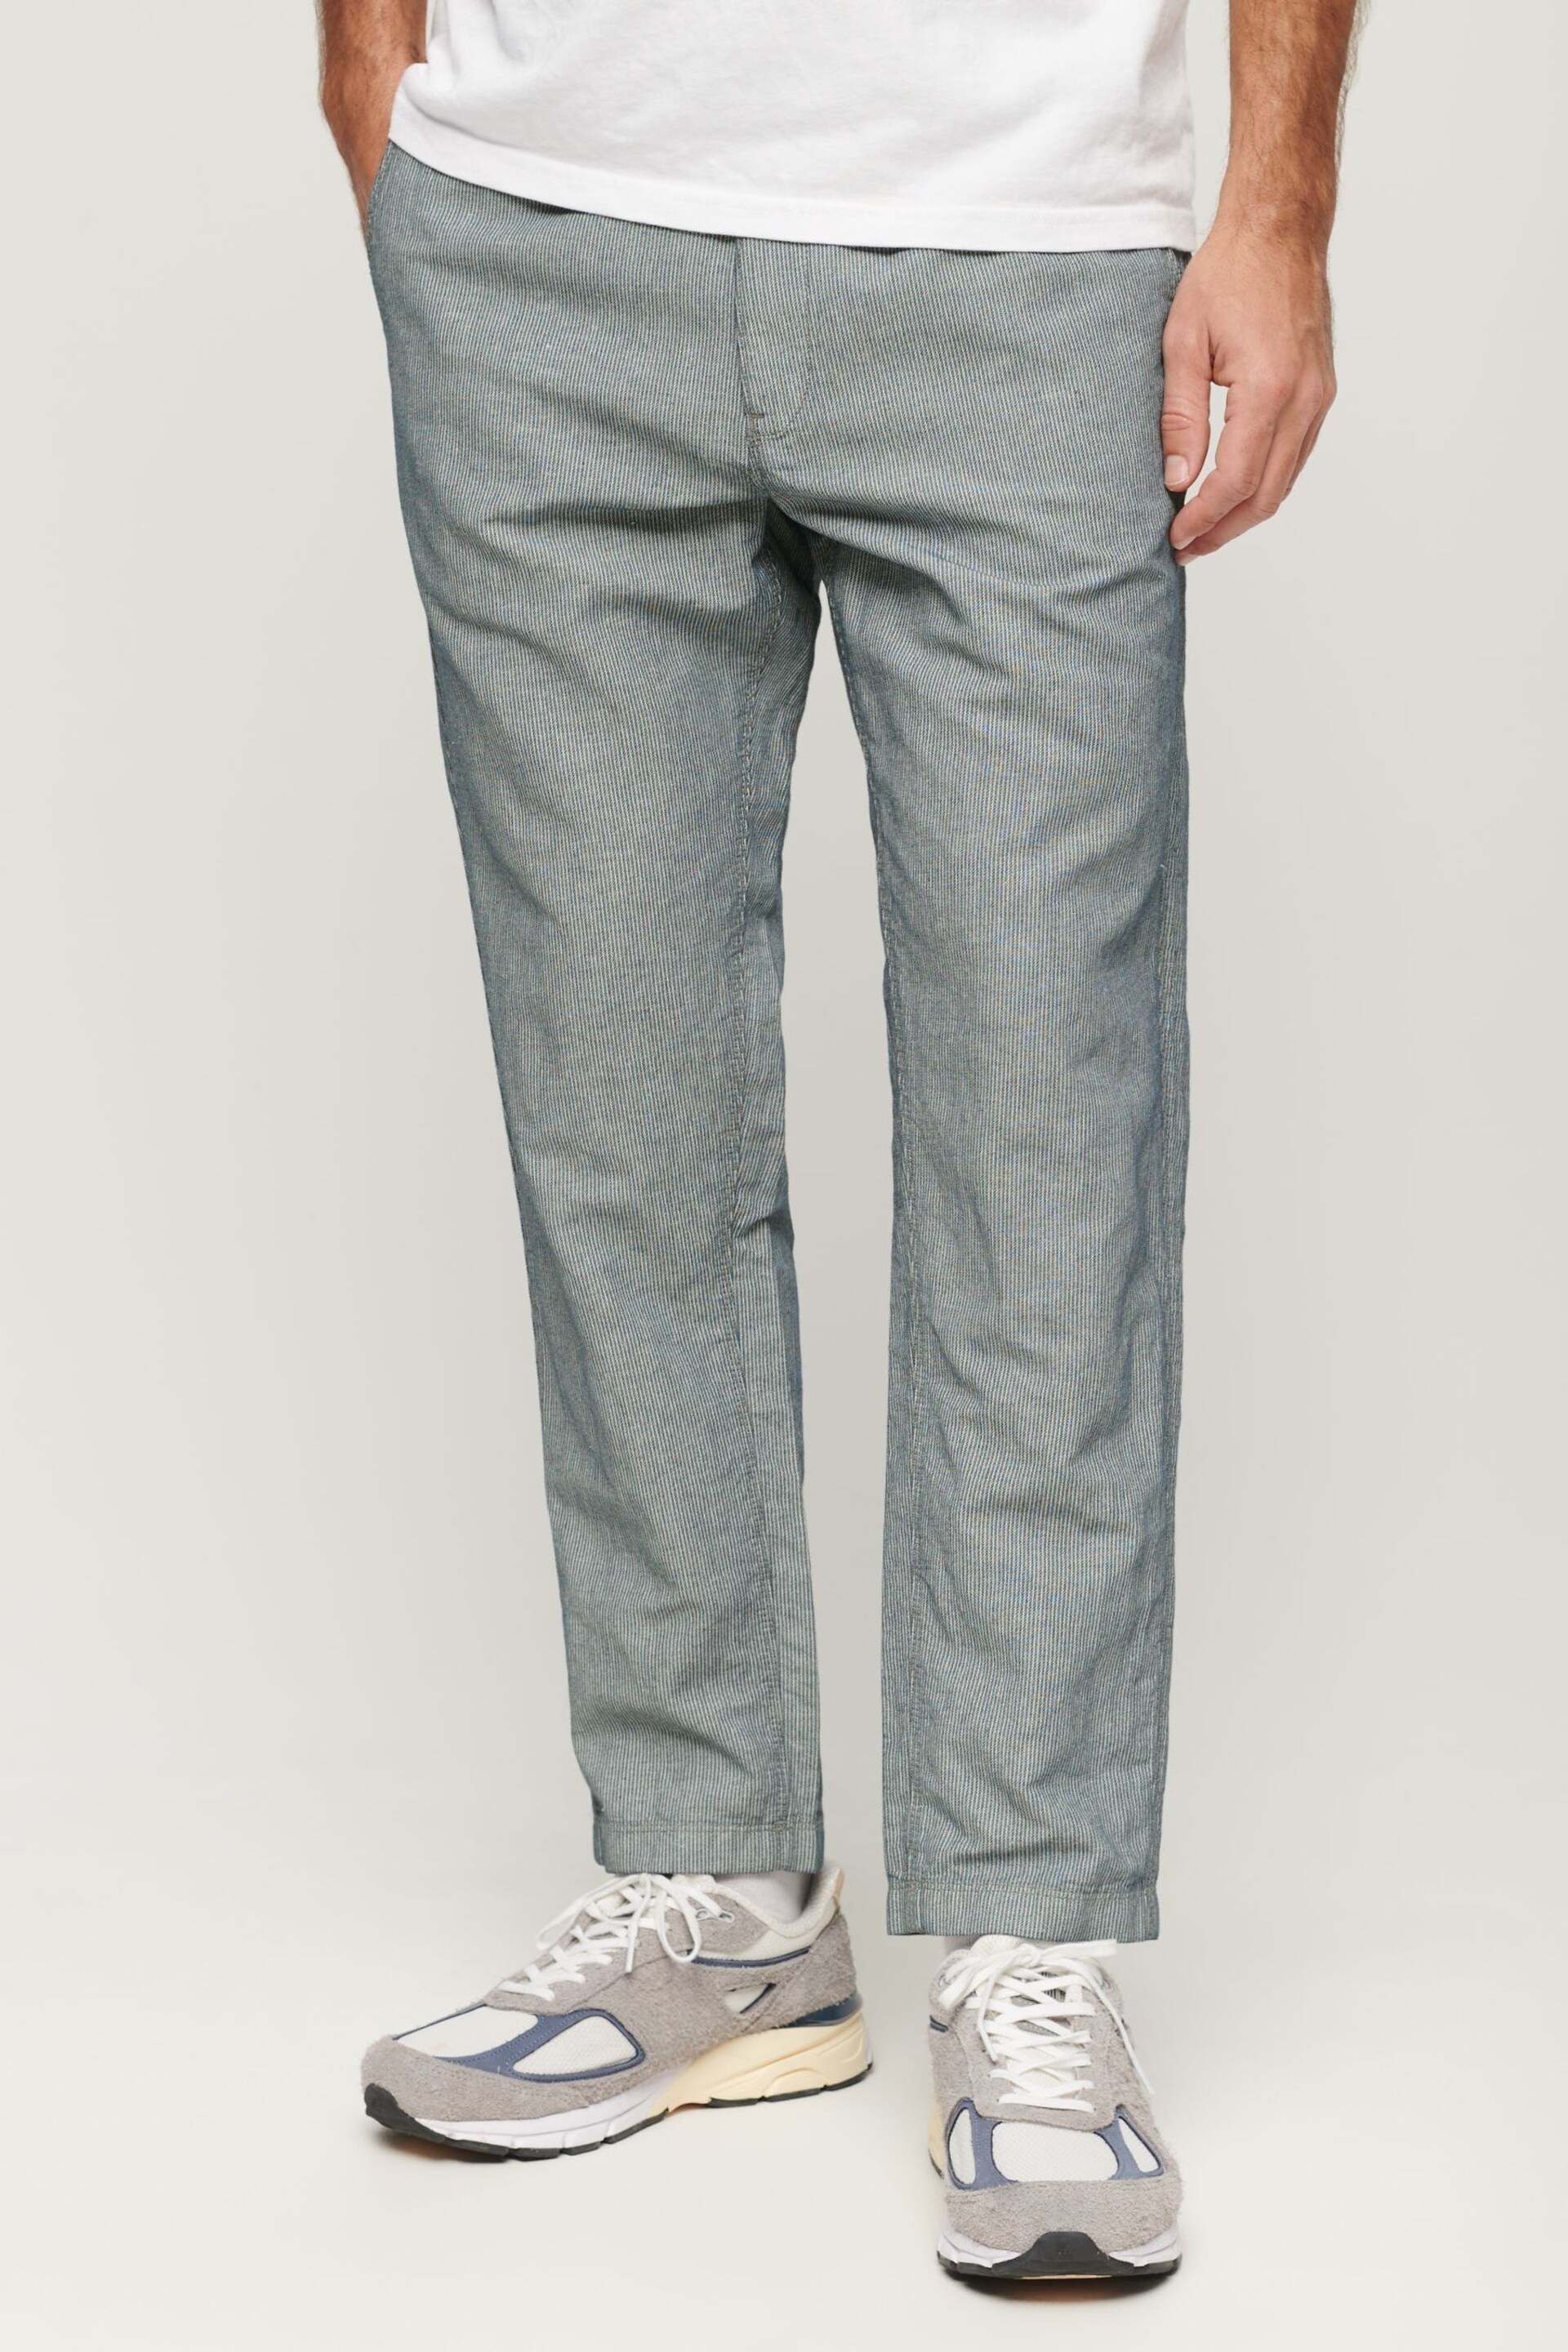 Superdry Grey Drawstring Linen Trousers - Image 1 of 5